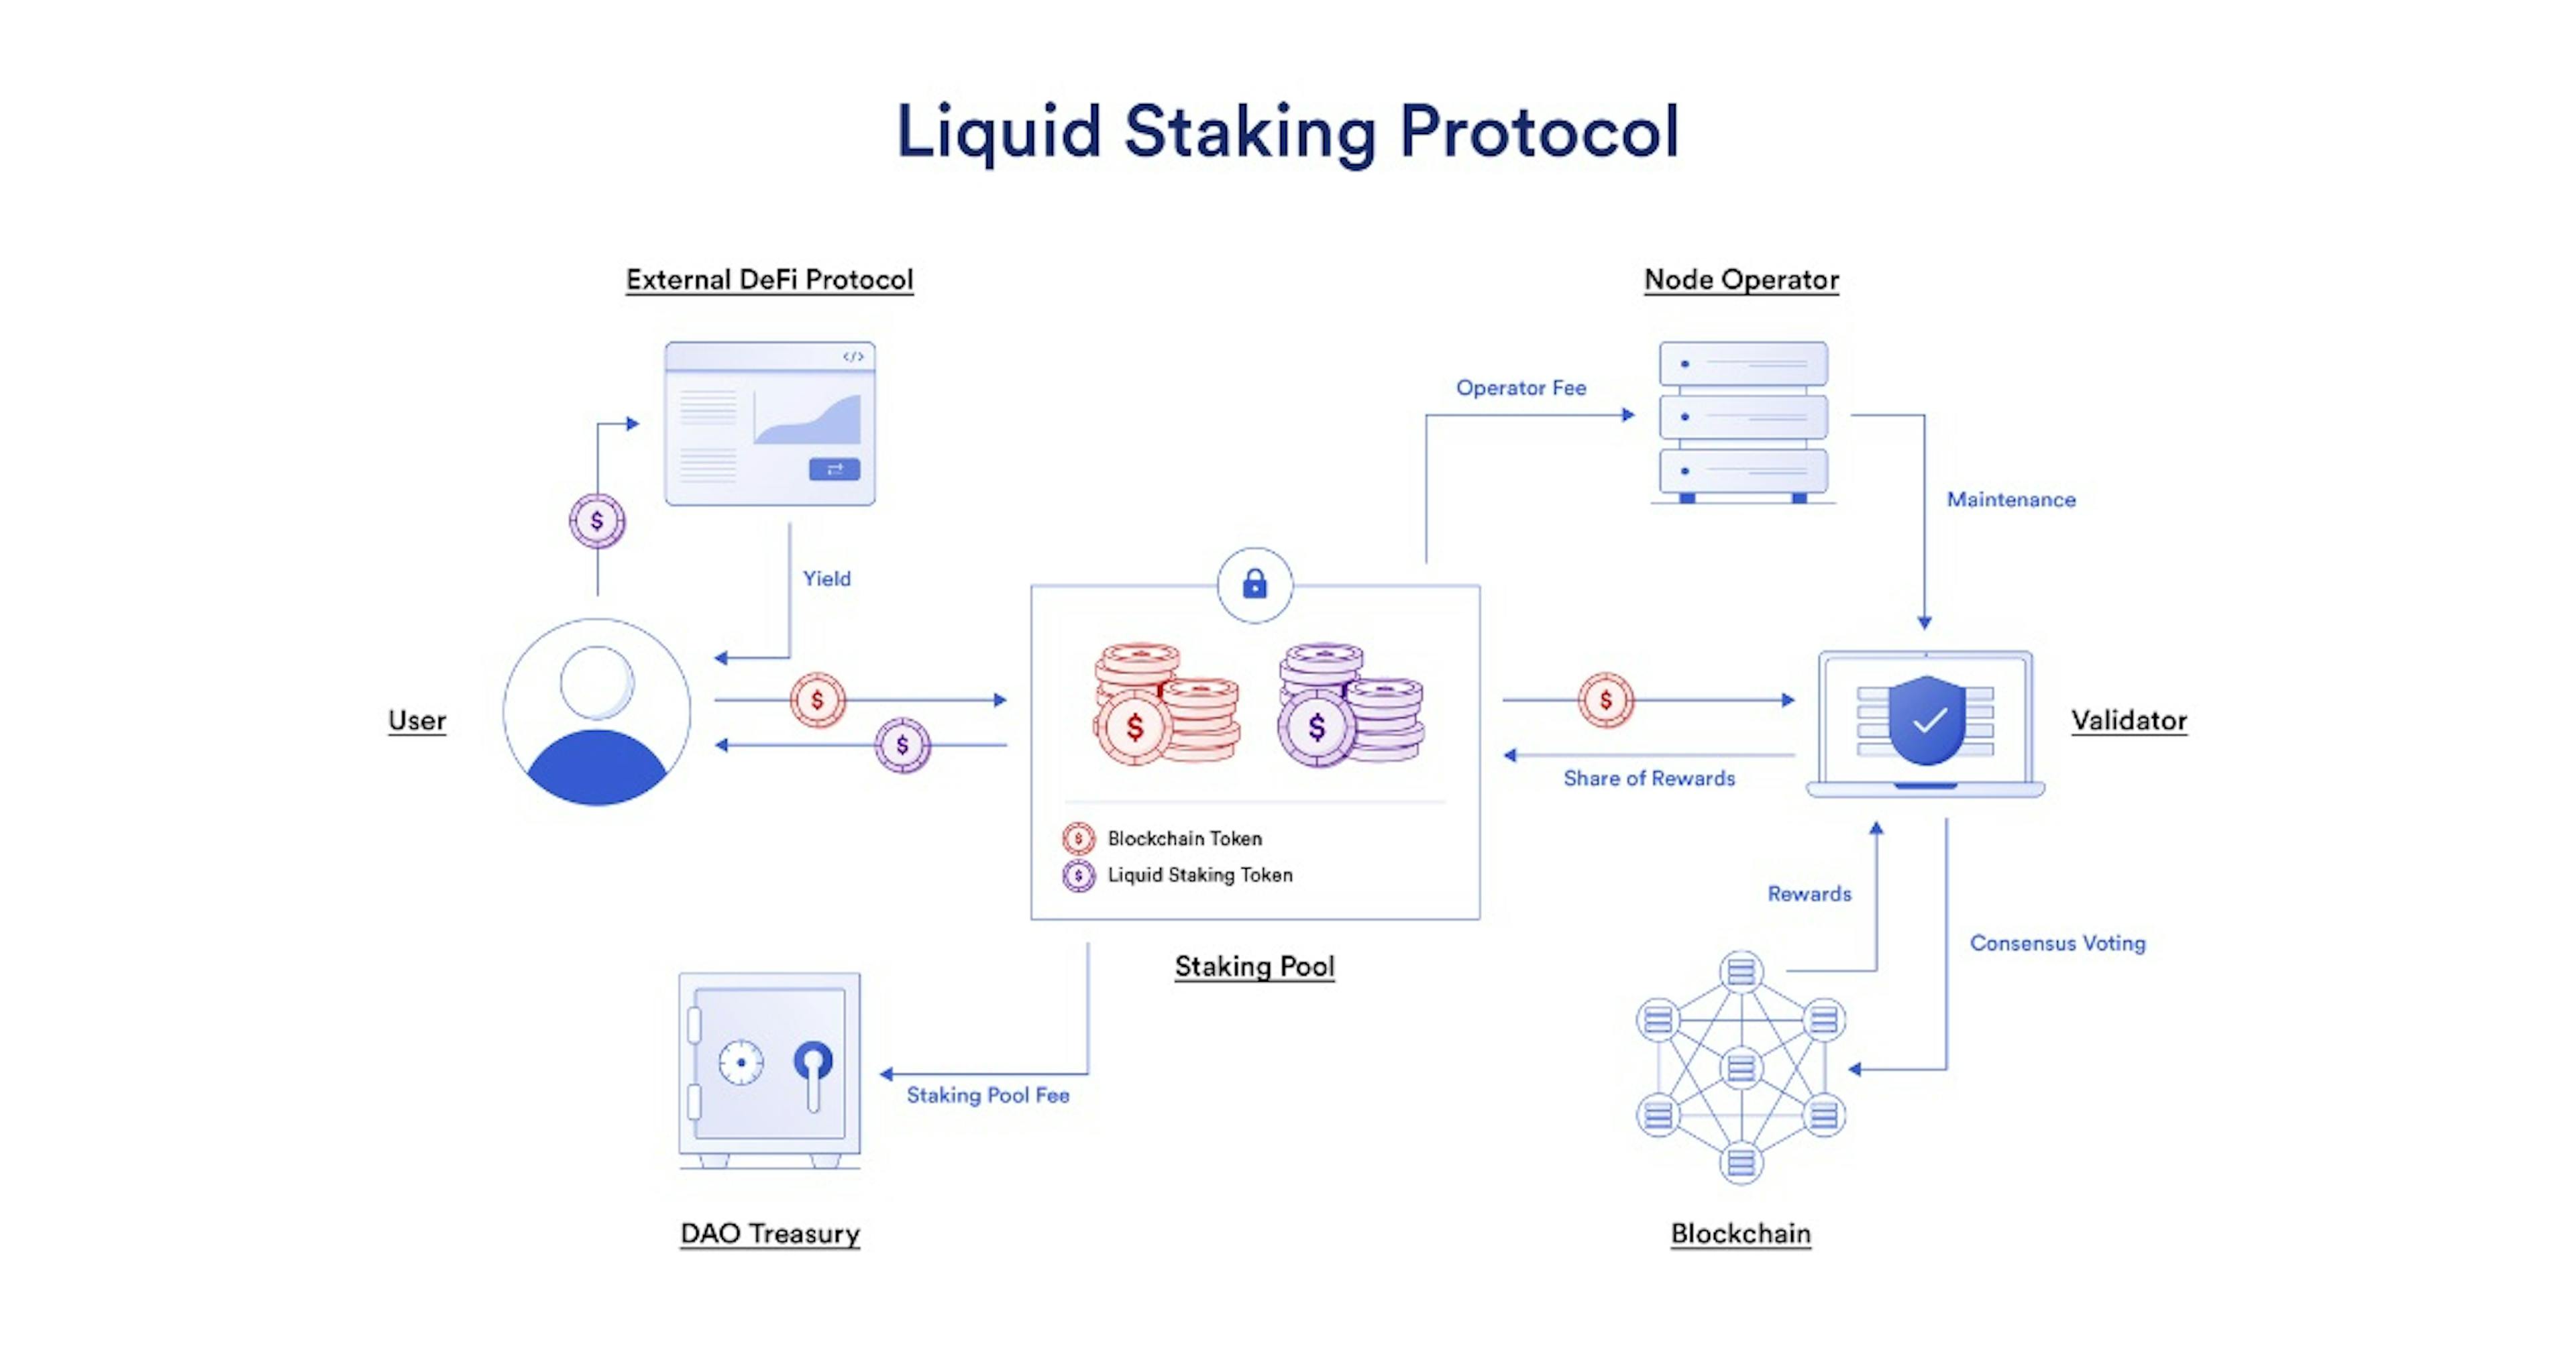 Liquid staking presents enhanced opportunities for rewards. Source: Chainlink